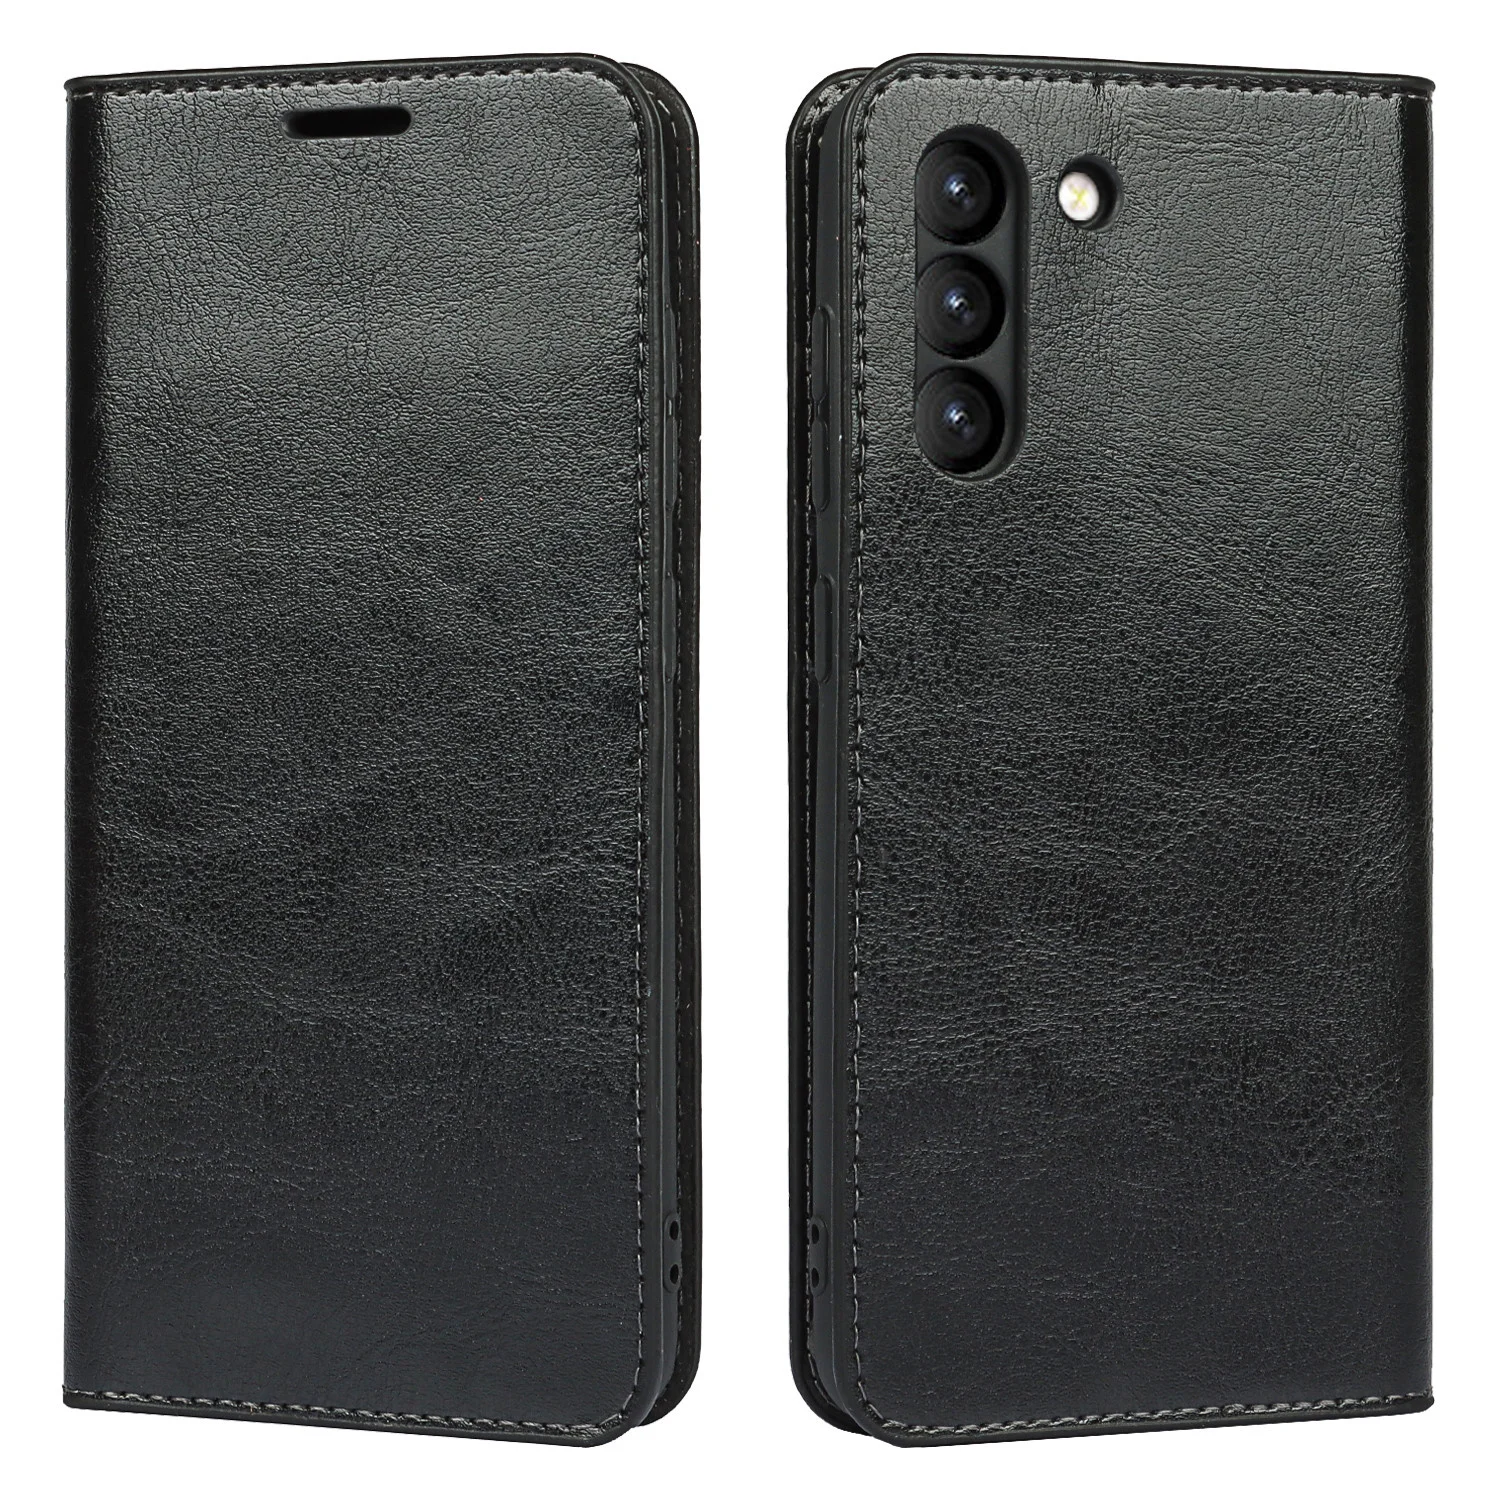 100% Real Genuine Leather Flip for Samsung Galaxy S20 S21 S22 Ultra Plus A53 A33 A52 A72 5G Case Wallet with Credit Card Holder galaxy s22 ultra flip case